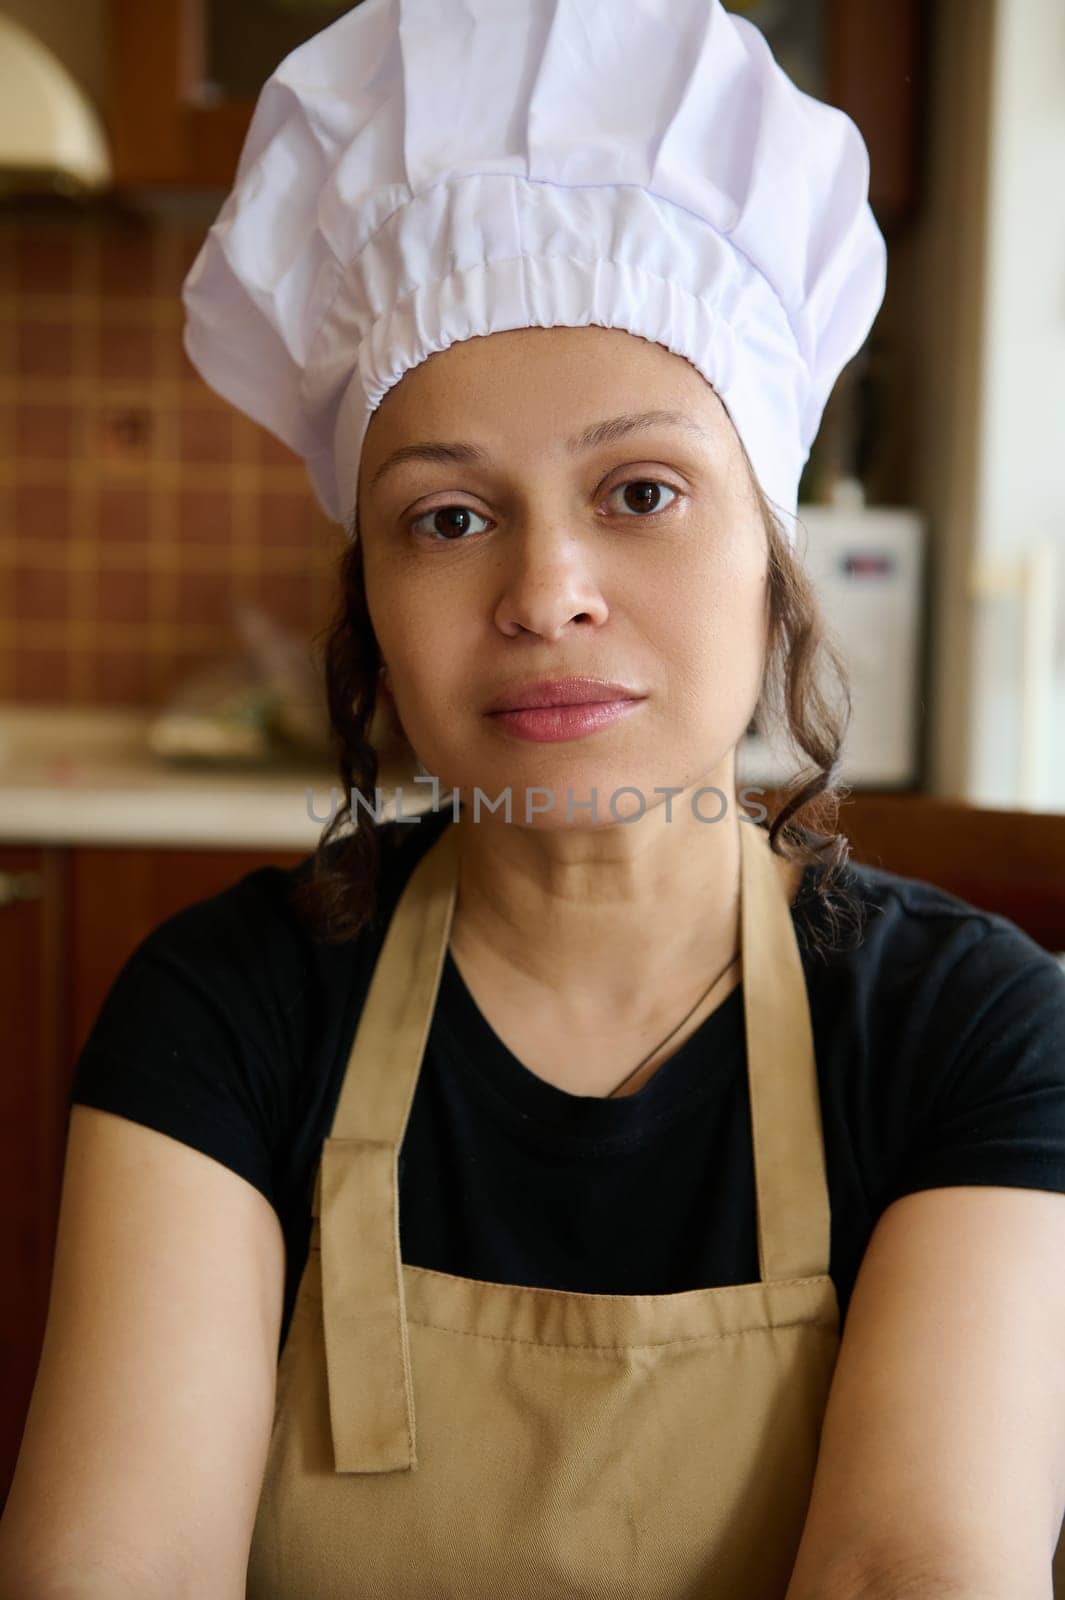 Confident portrait of a beautiful female baker confectioner, wearing white chef's hat and beige apron, looking at camera by artgf